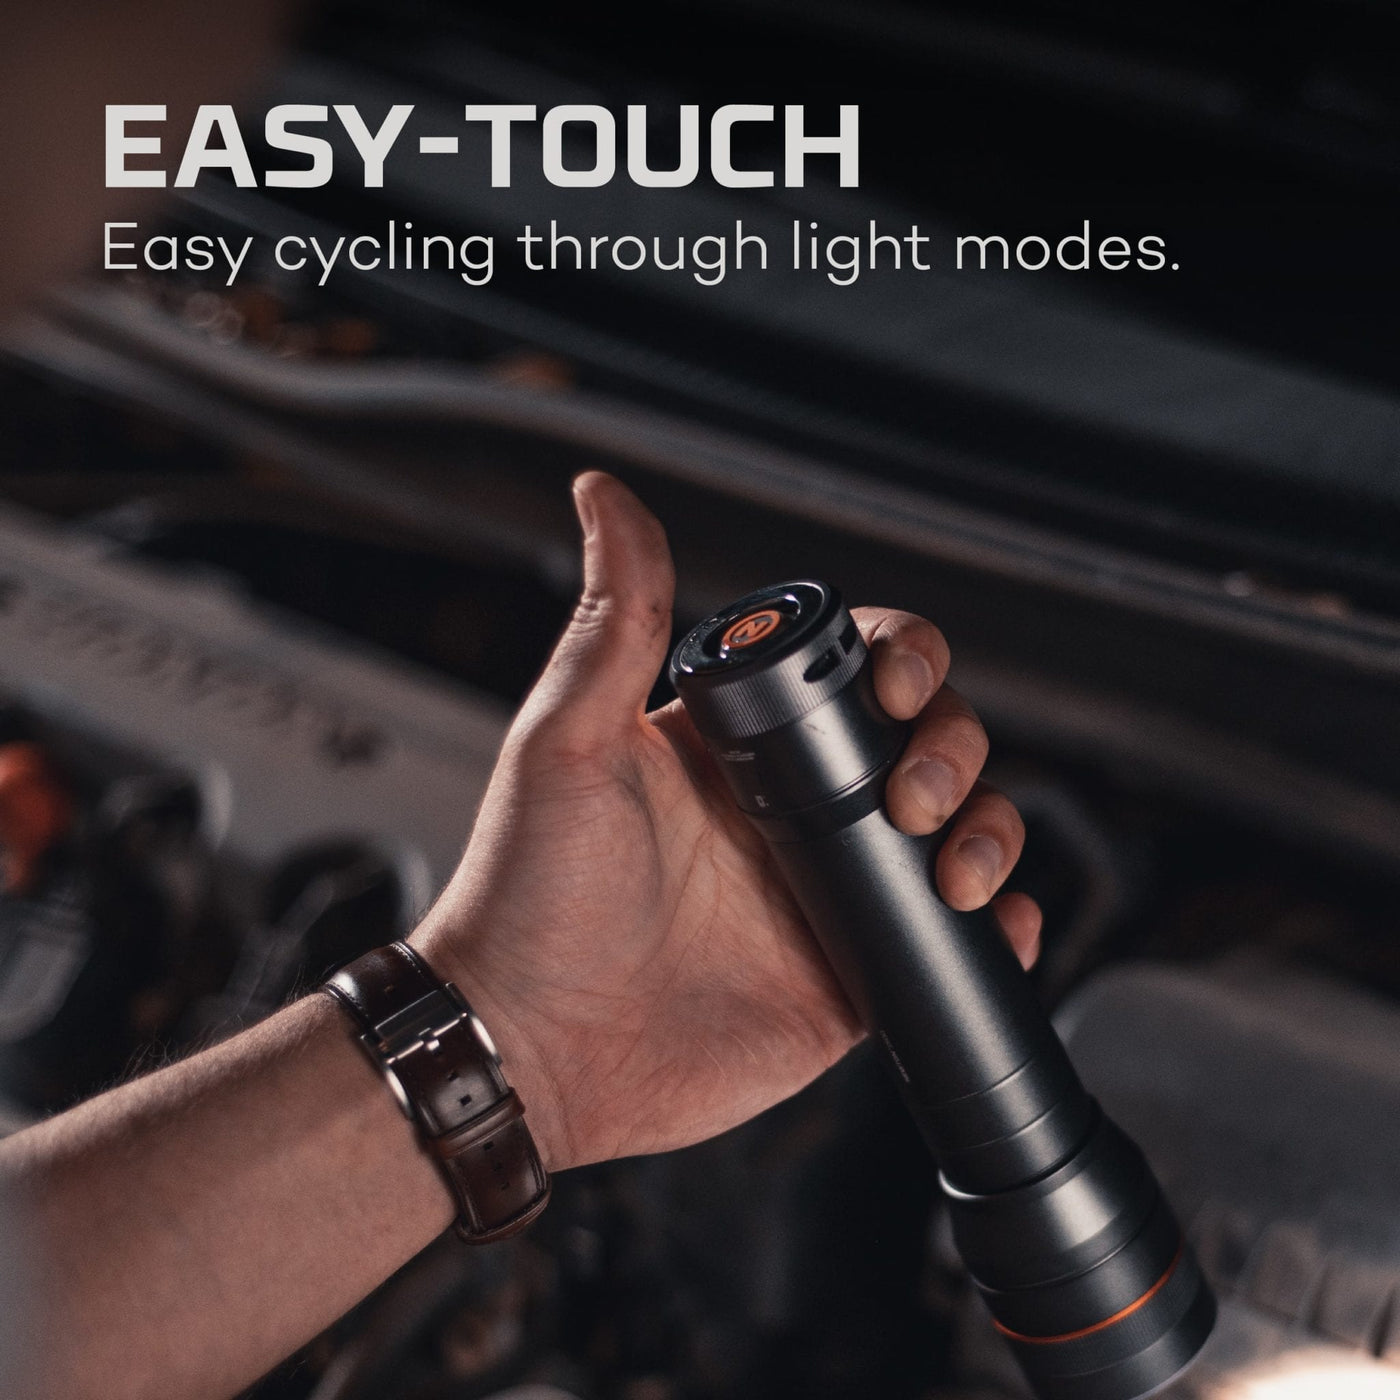 At Nebo Tools, we continually innovate so that we can offer the highest quality LED lighting products at the best price. The Newton™ 1500 lumen flashlight by NEBO is a powerful handheld flashlight with 4 light modes. The included mode selection dial makes it easy to switch between modes and the powerful LED in this flashlight can light up 182 meters.